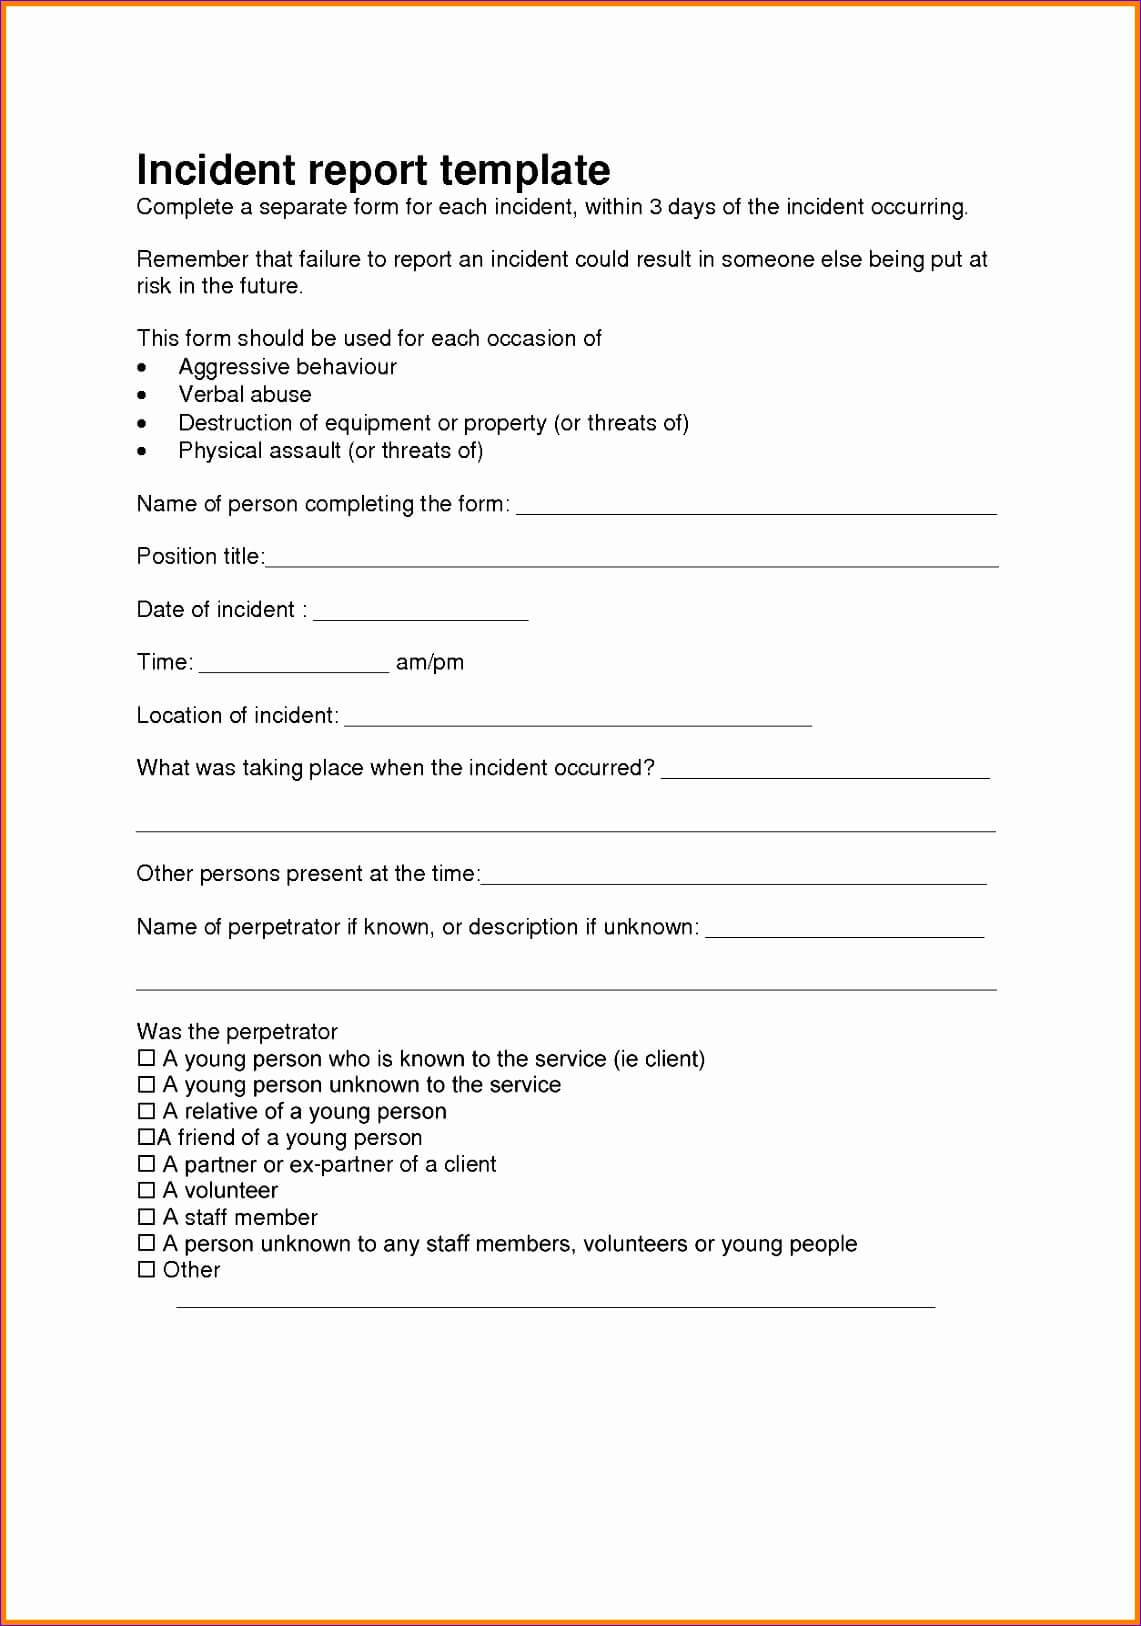 Free Incident Report Template – Fiveoutsiders Within Ohs Incident Report Template Free